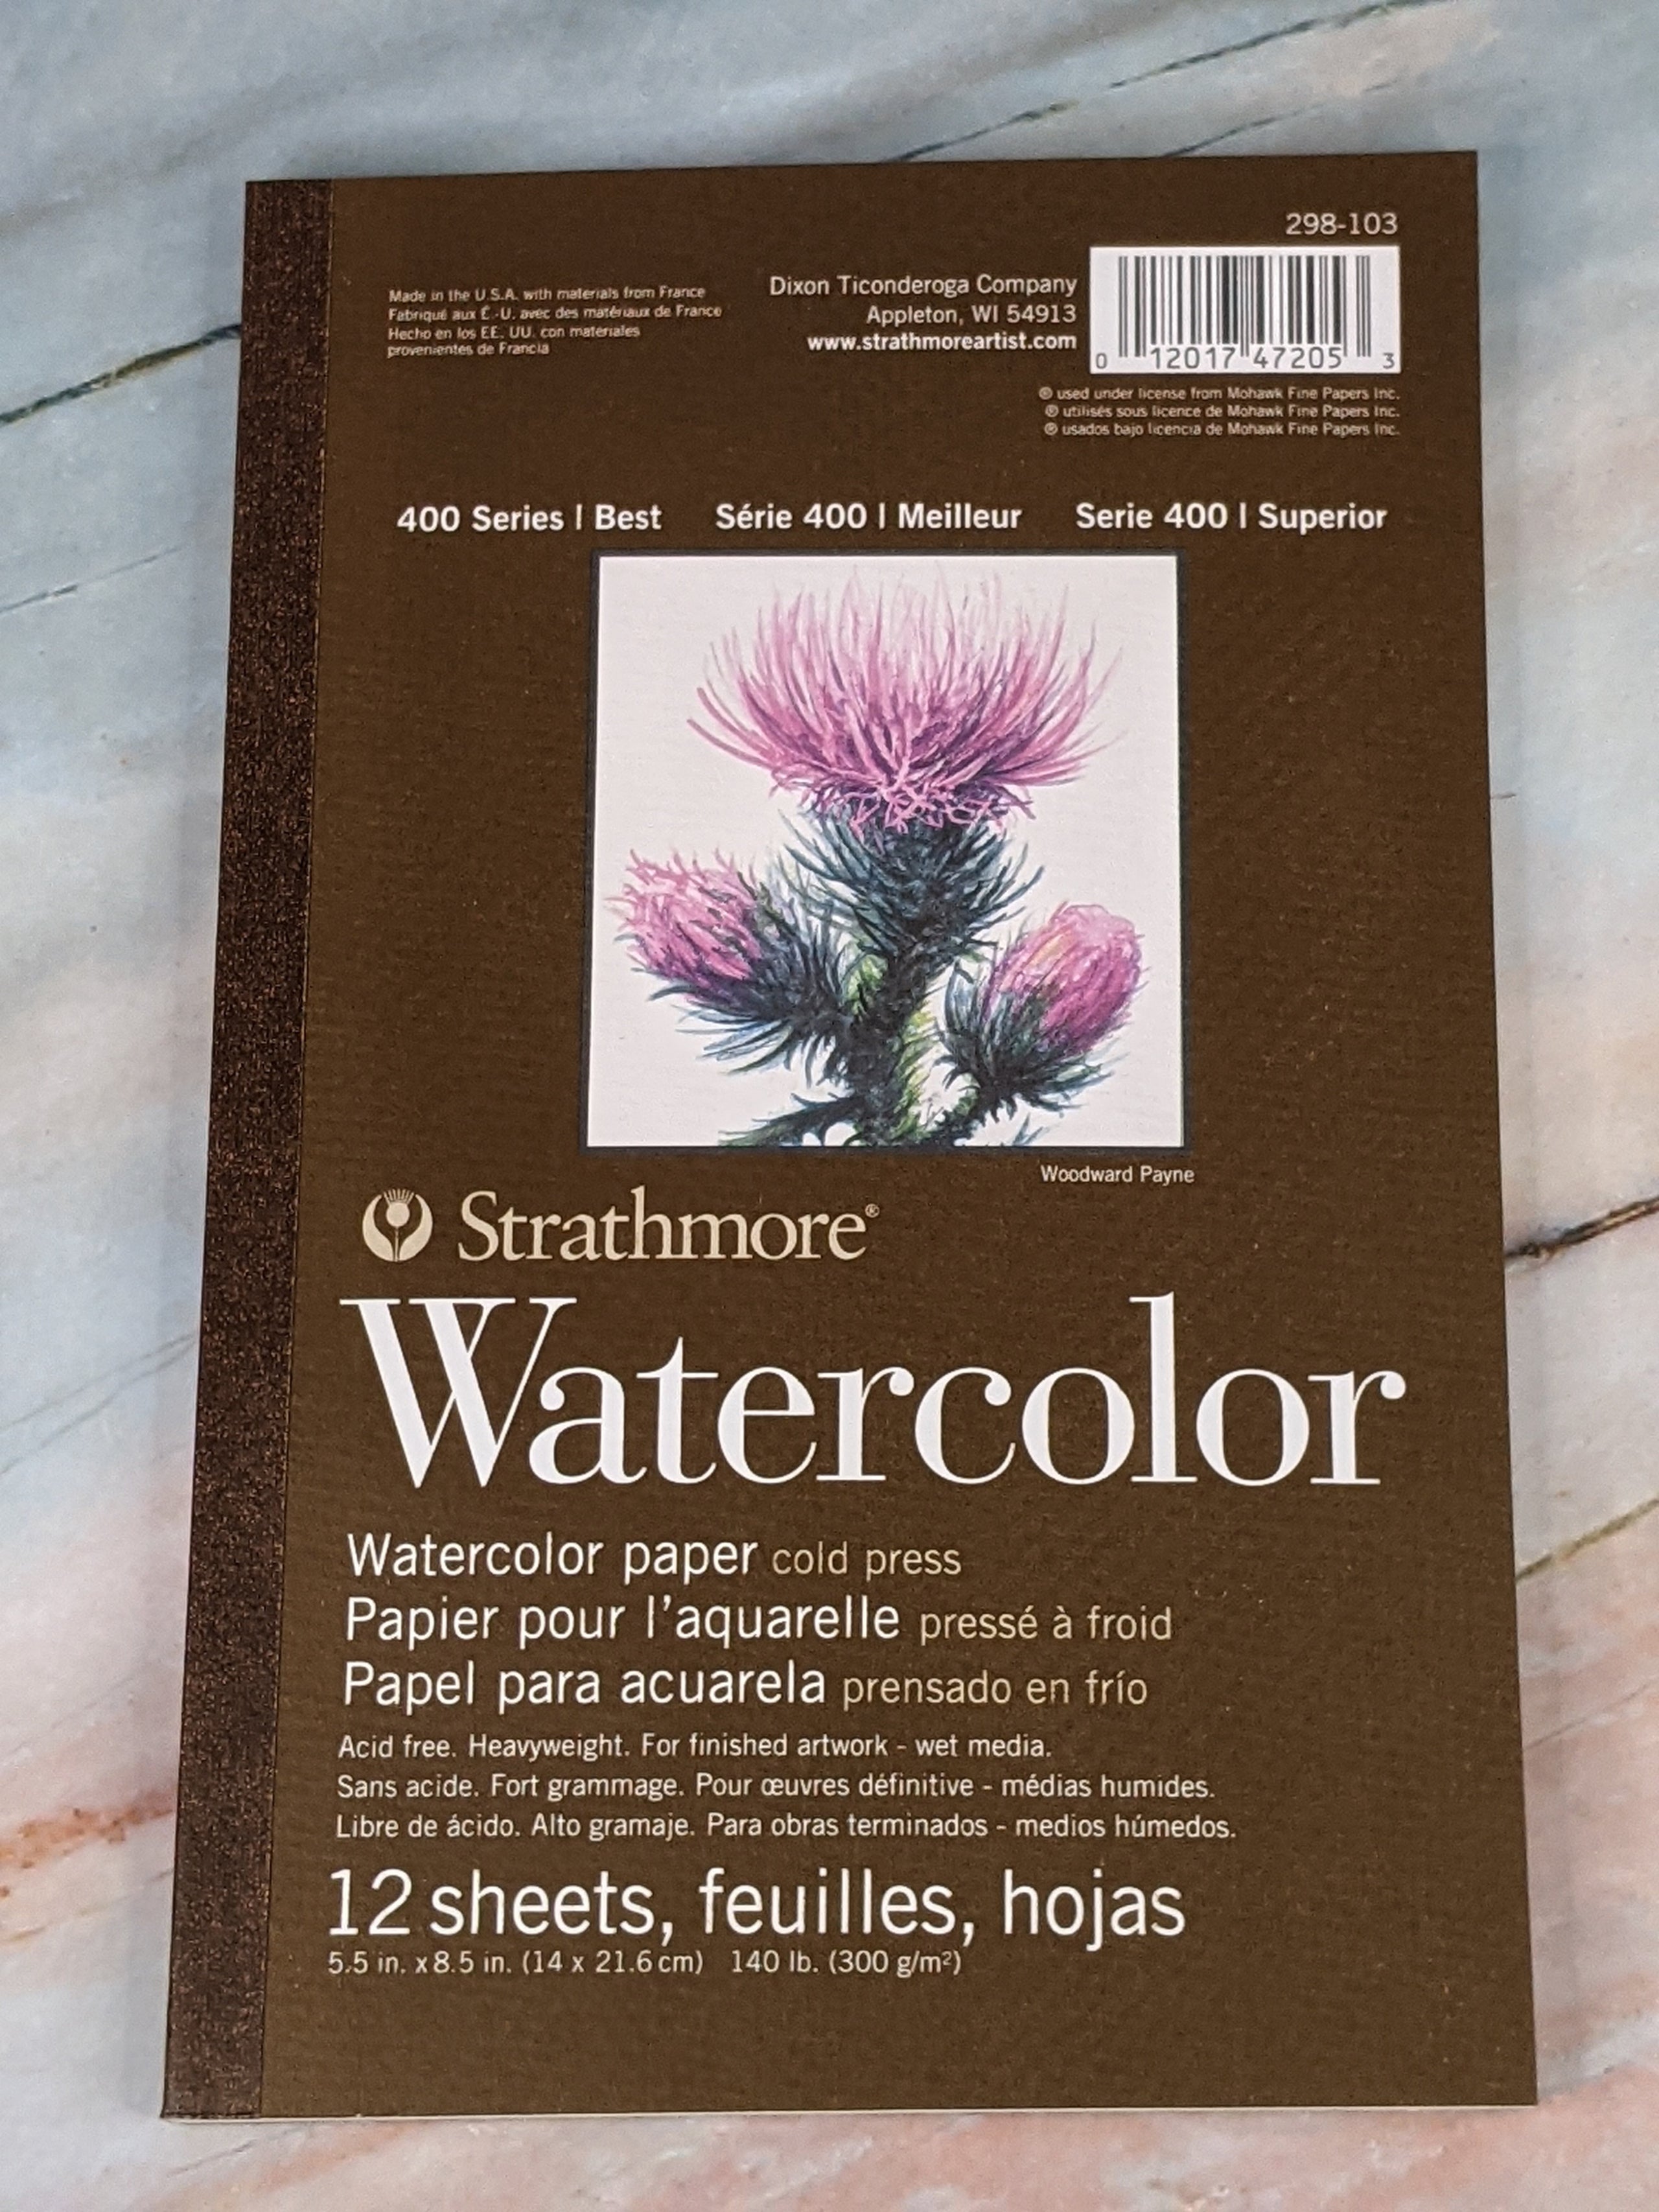 Strathmore Watercolor Paper Art Notebook